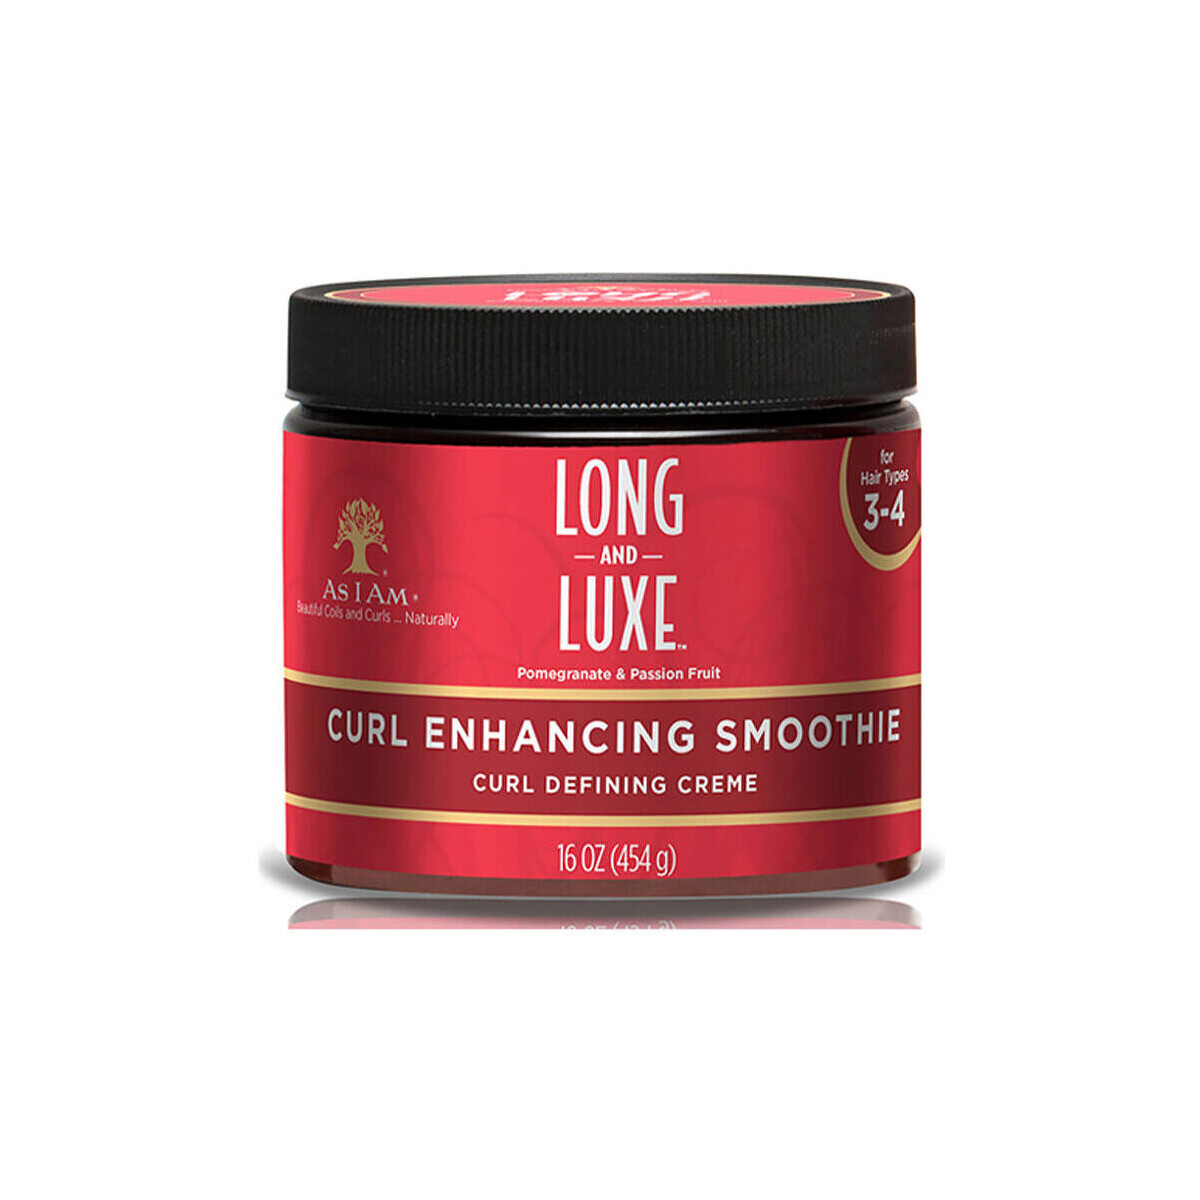 Bellezza Donna Maschere &Balsamo As I Am Long And Luxe Curl Enhaning Smoothie 454 Gr 